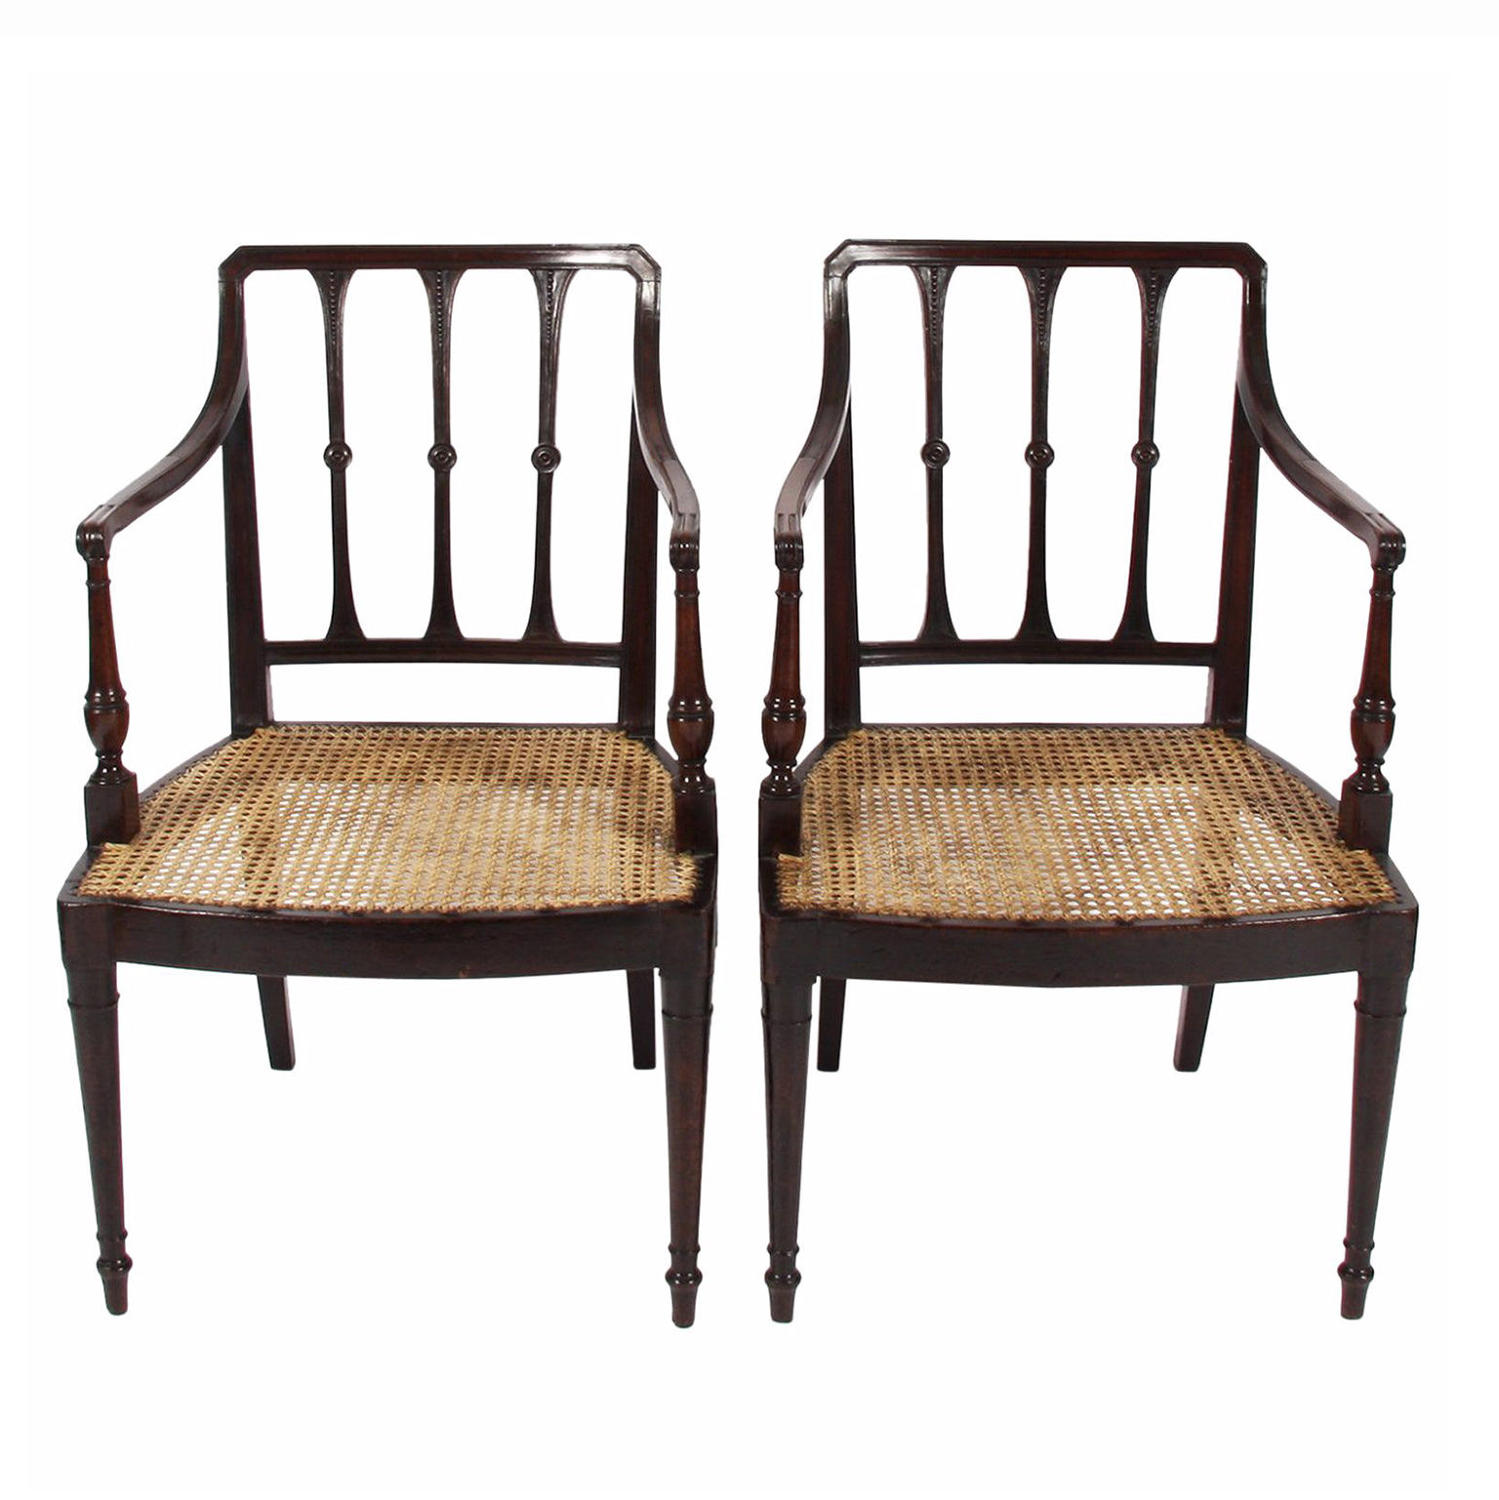 Pair of Caned Chairs